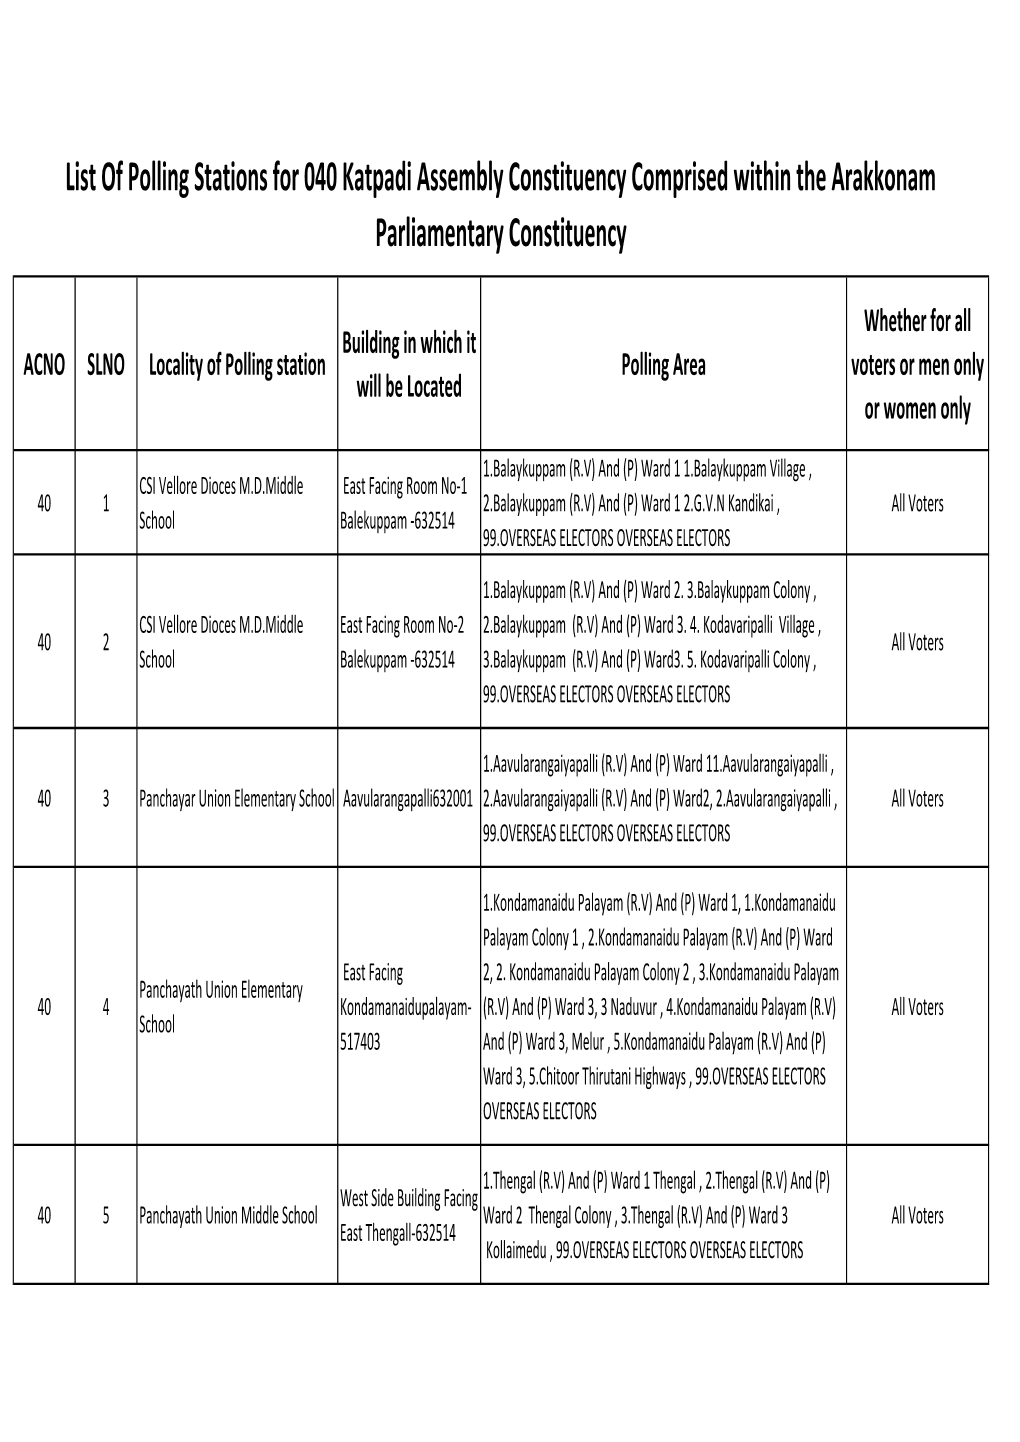 List of Polling Stations for 040 Katpadi Assembly Constituency Comprised Within the Arakkonam Parliamentary Constituency